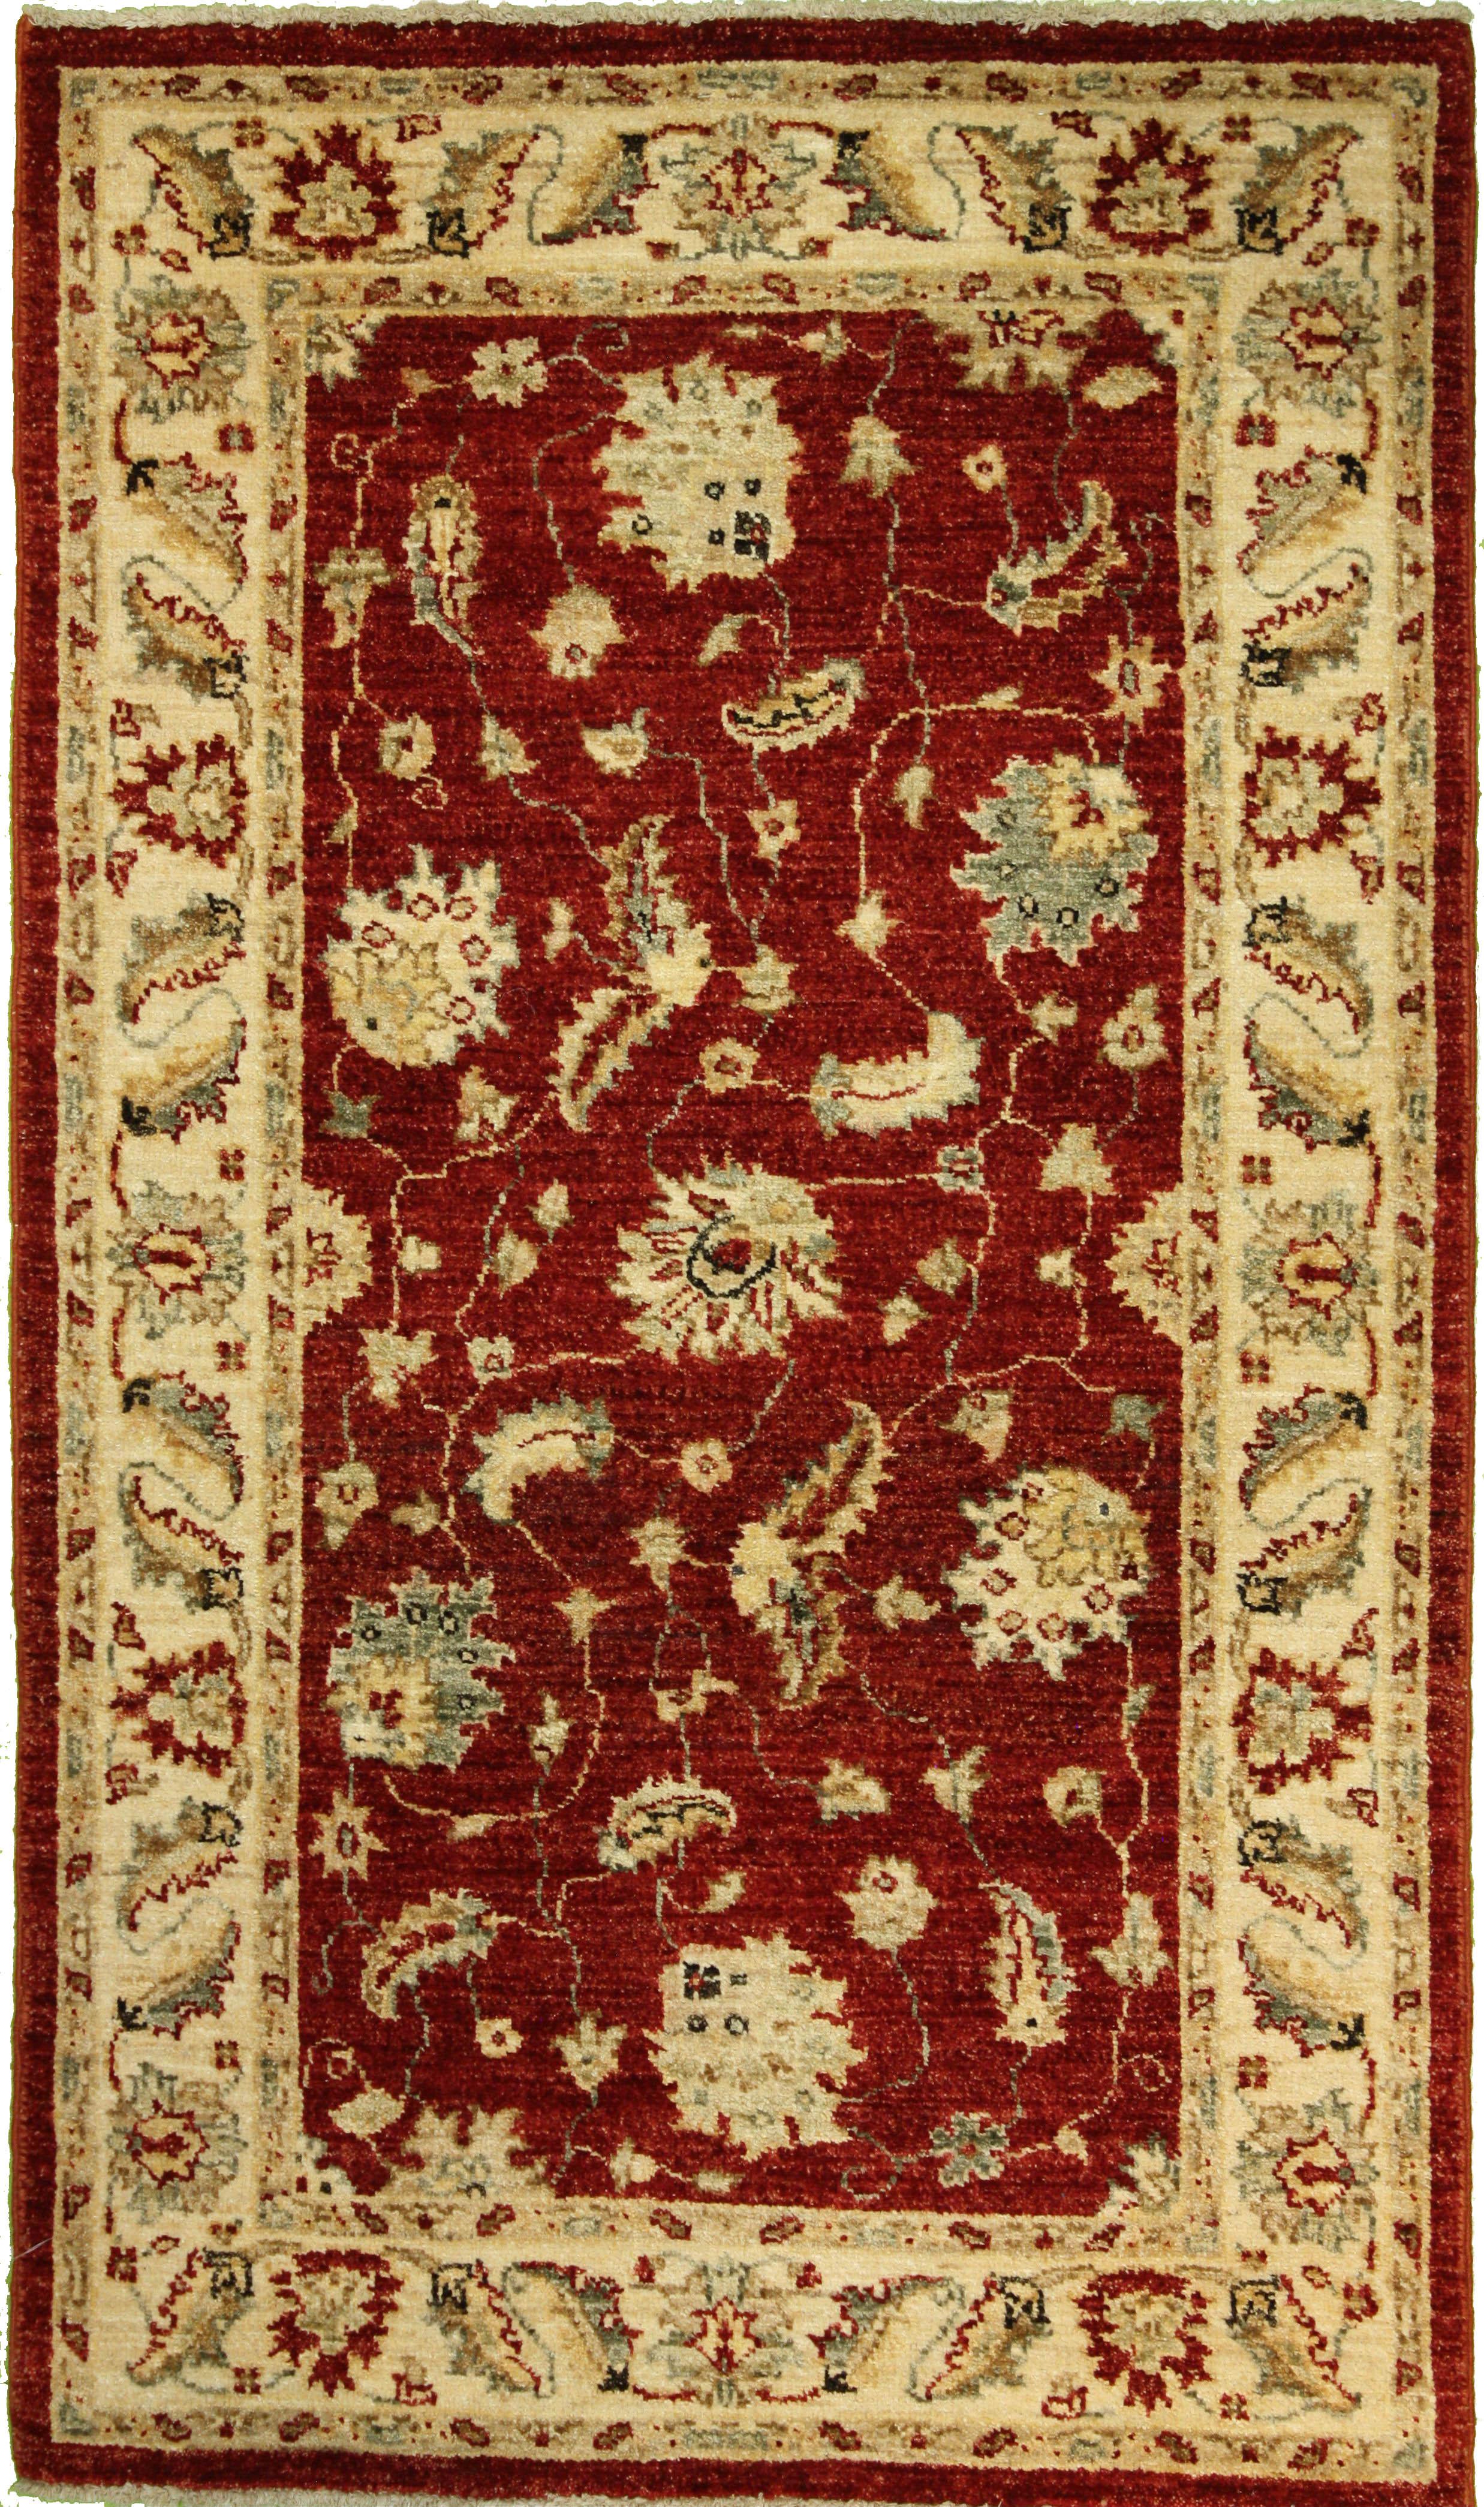 Hand Knotted Wool Red Dk Traditional Pakistan Rug 3' x 5'3"